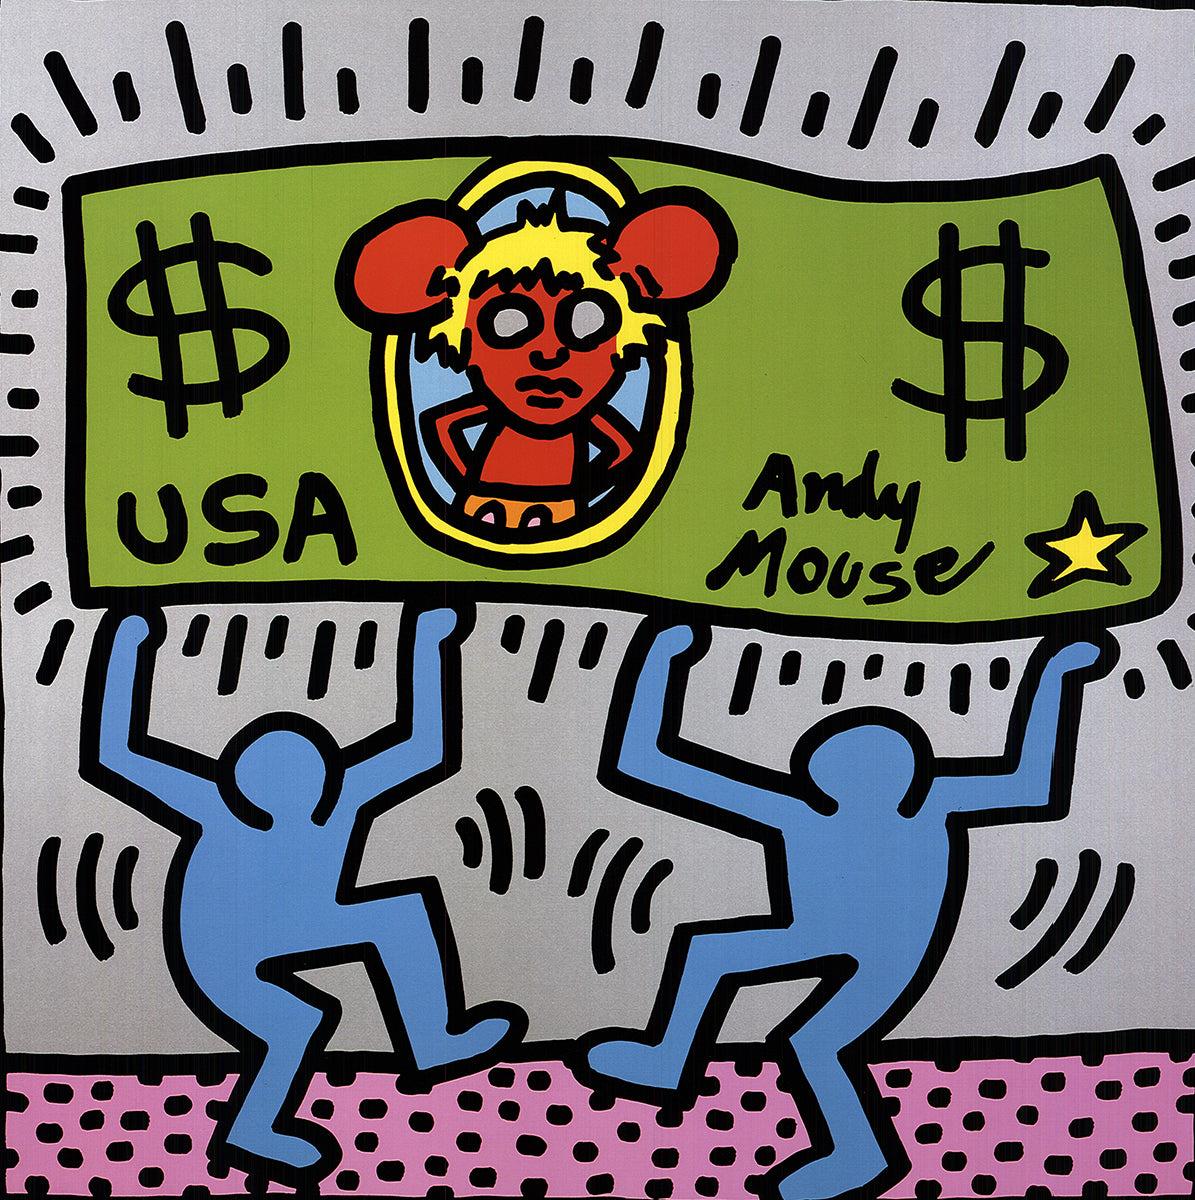 Keith Haring 'Andy Mouse' 1990- Poster For Sale 1